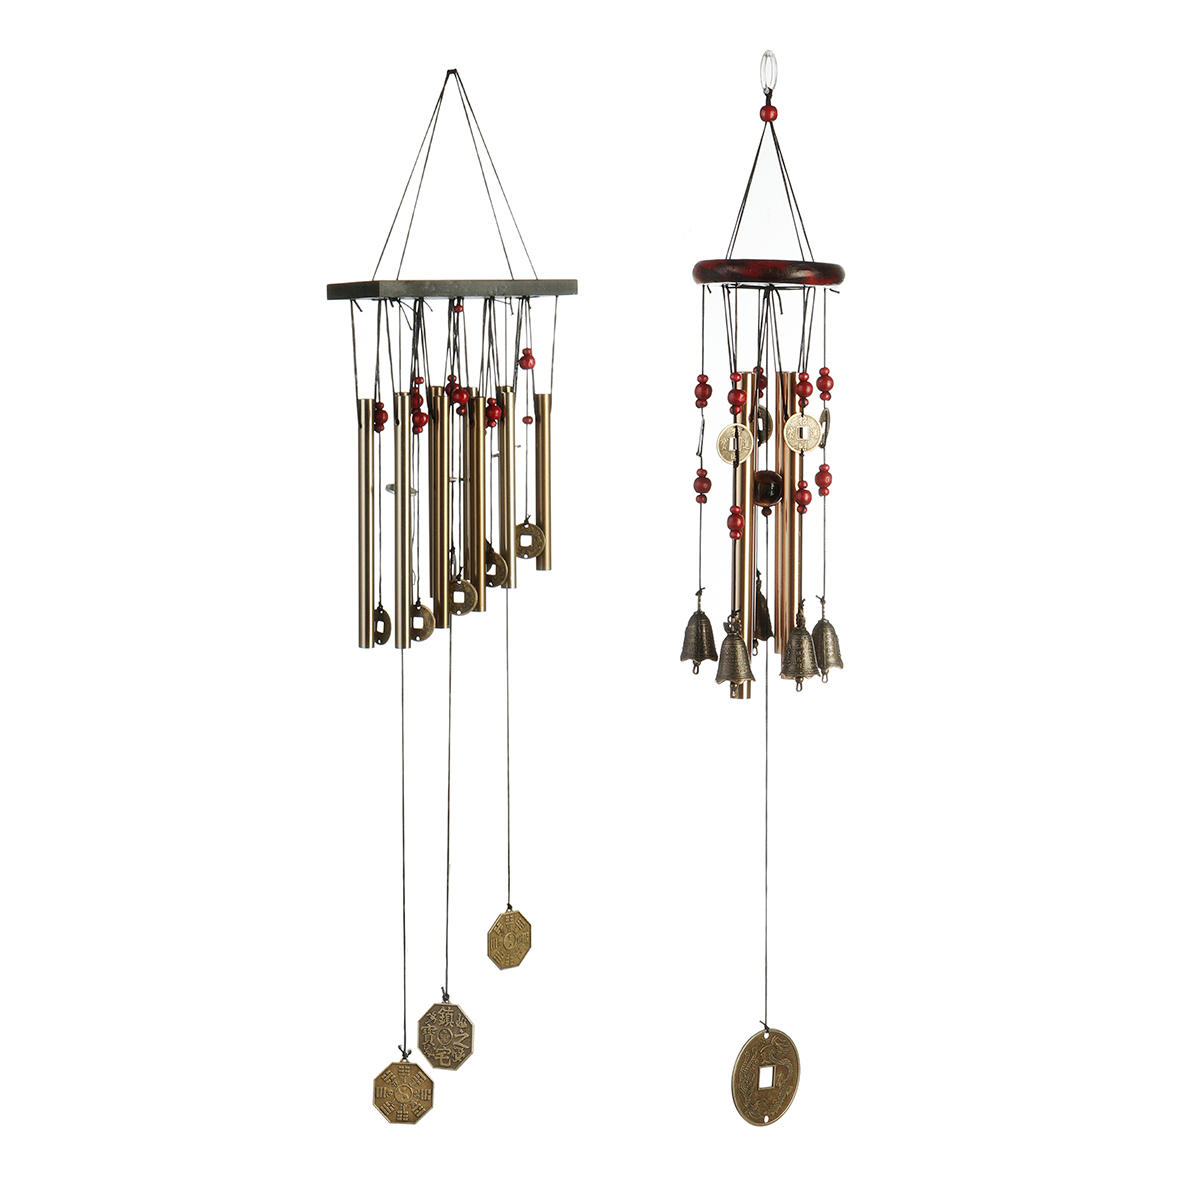 

2 Sizes 4 Tubes/10 Tubes Outdoor Amazing Antique Wind Chimes Outdoor Yard Bells Garden Hanging Decorations Gifts